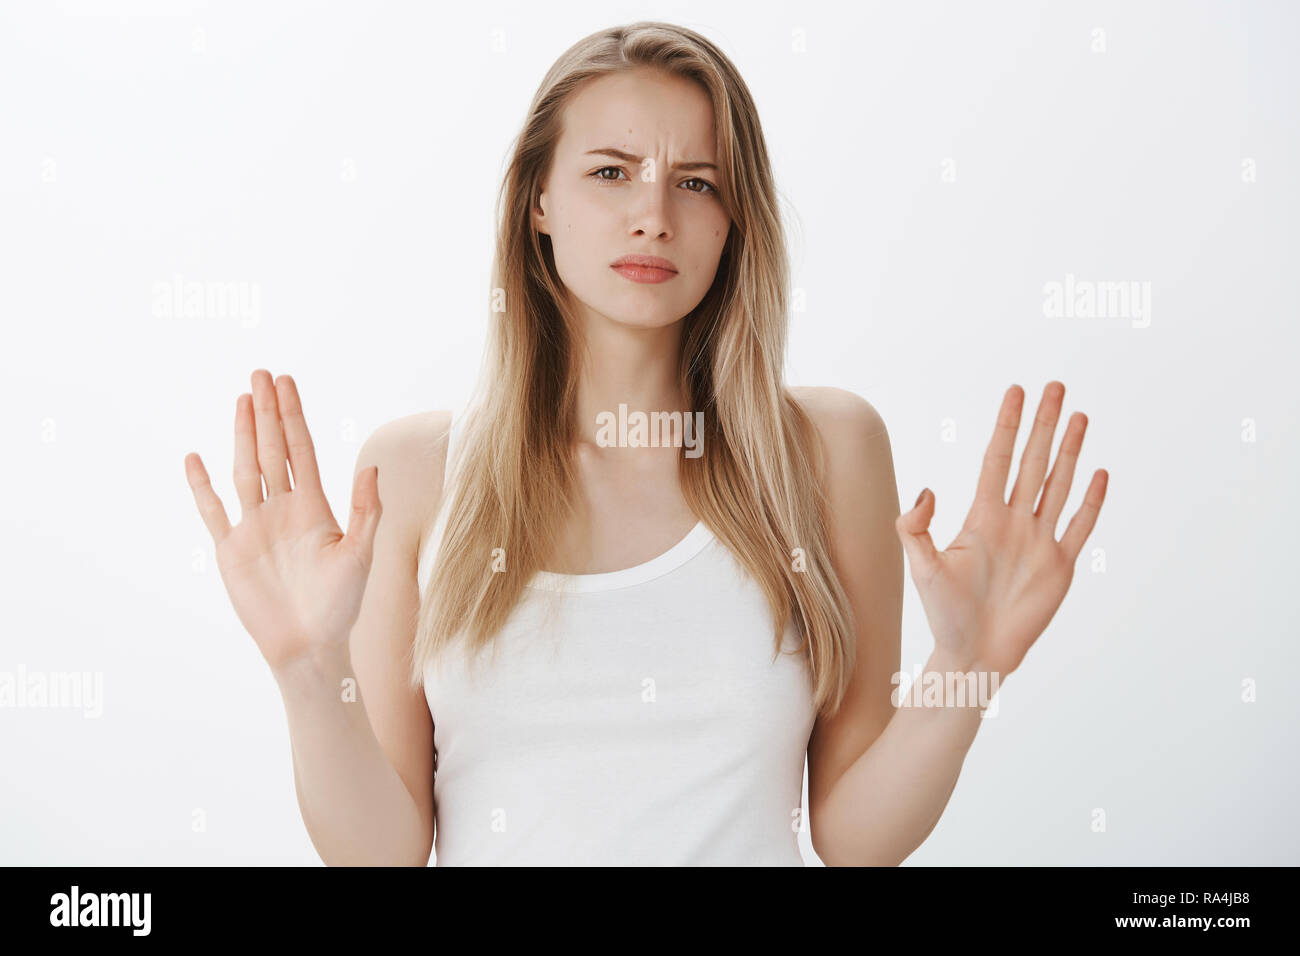 Stop, enough of lies. Portrait of displeased and sad cute bothered woman with fair hair frowning from dislike sweeping hands in enough and not gesture, giving refusal and firm no. Stock Photo